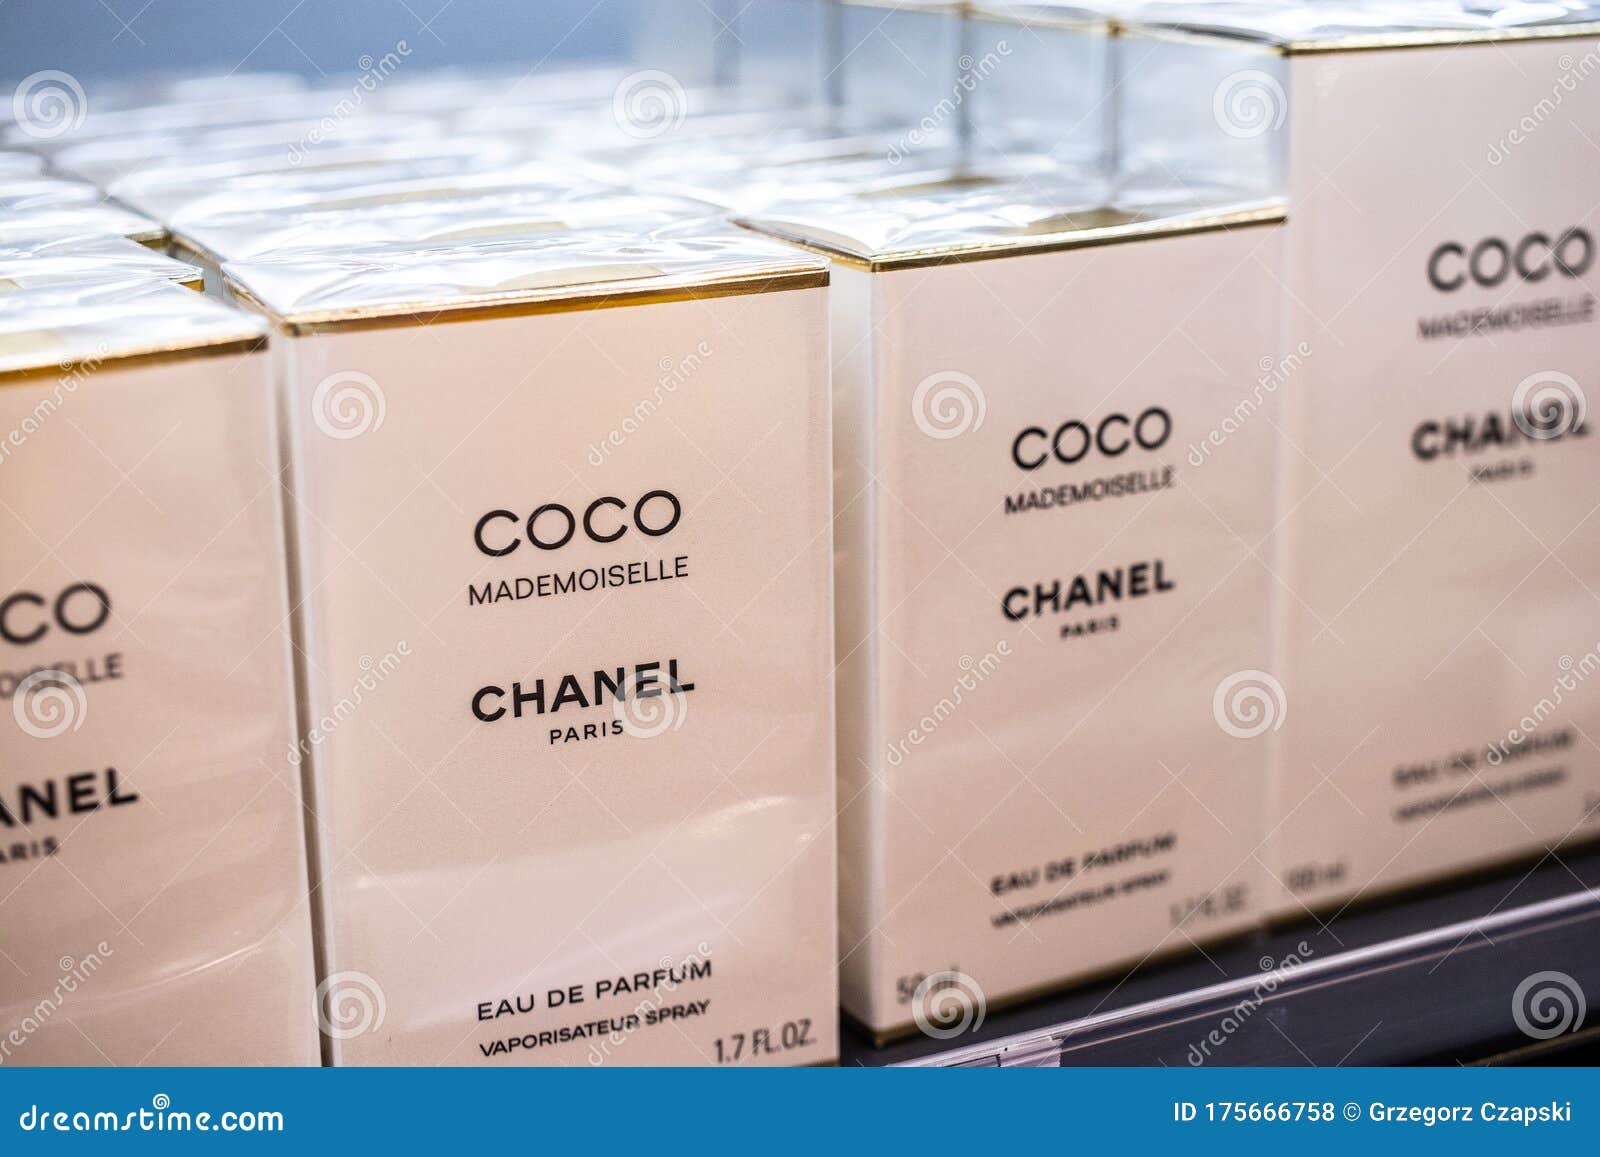 Coco Mademoiselle Chanel Perfume on the Shop Display for Sale Editorial  Stock Photo - Image of couturier, female: 175666758